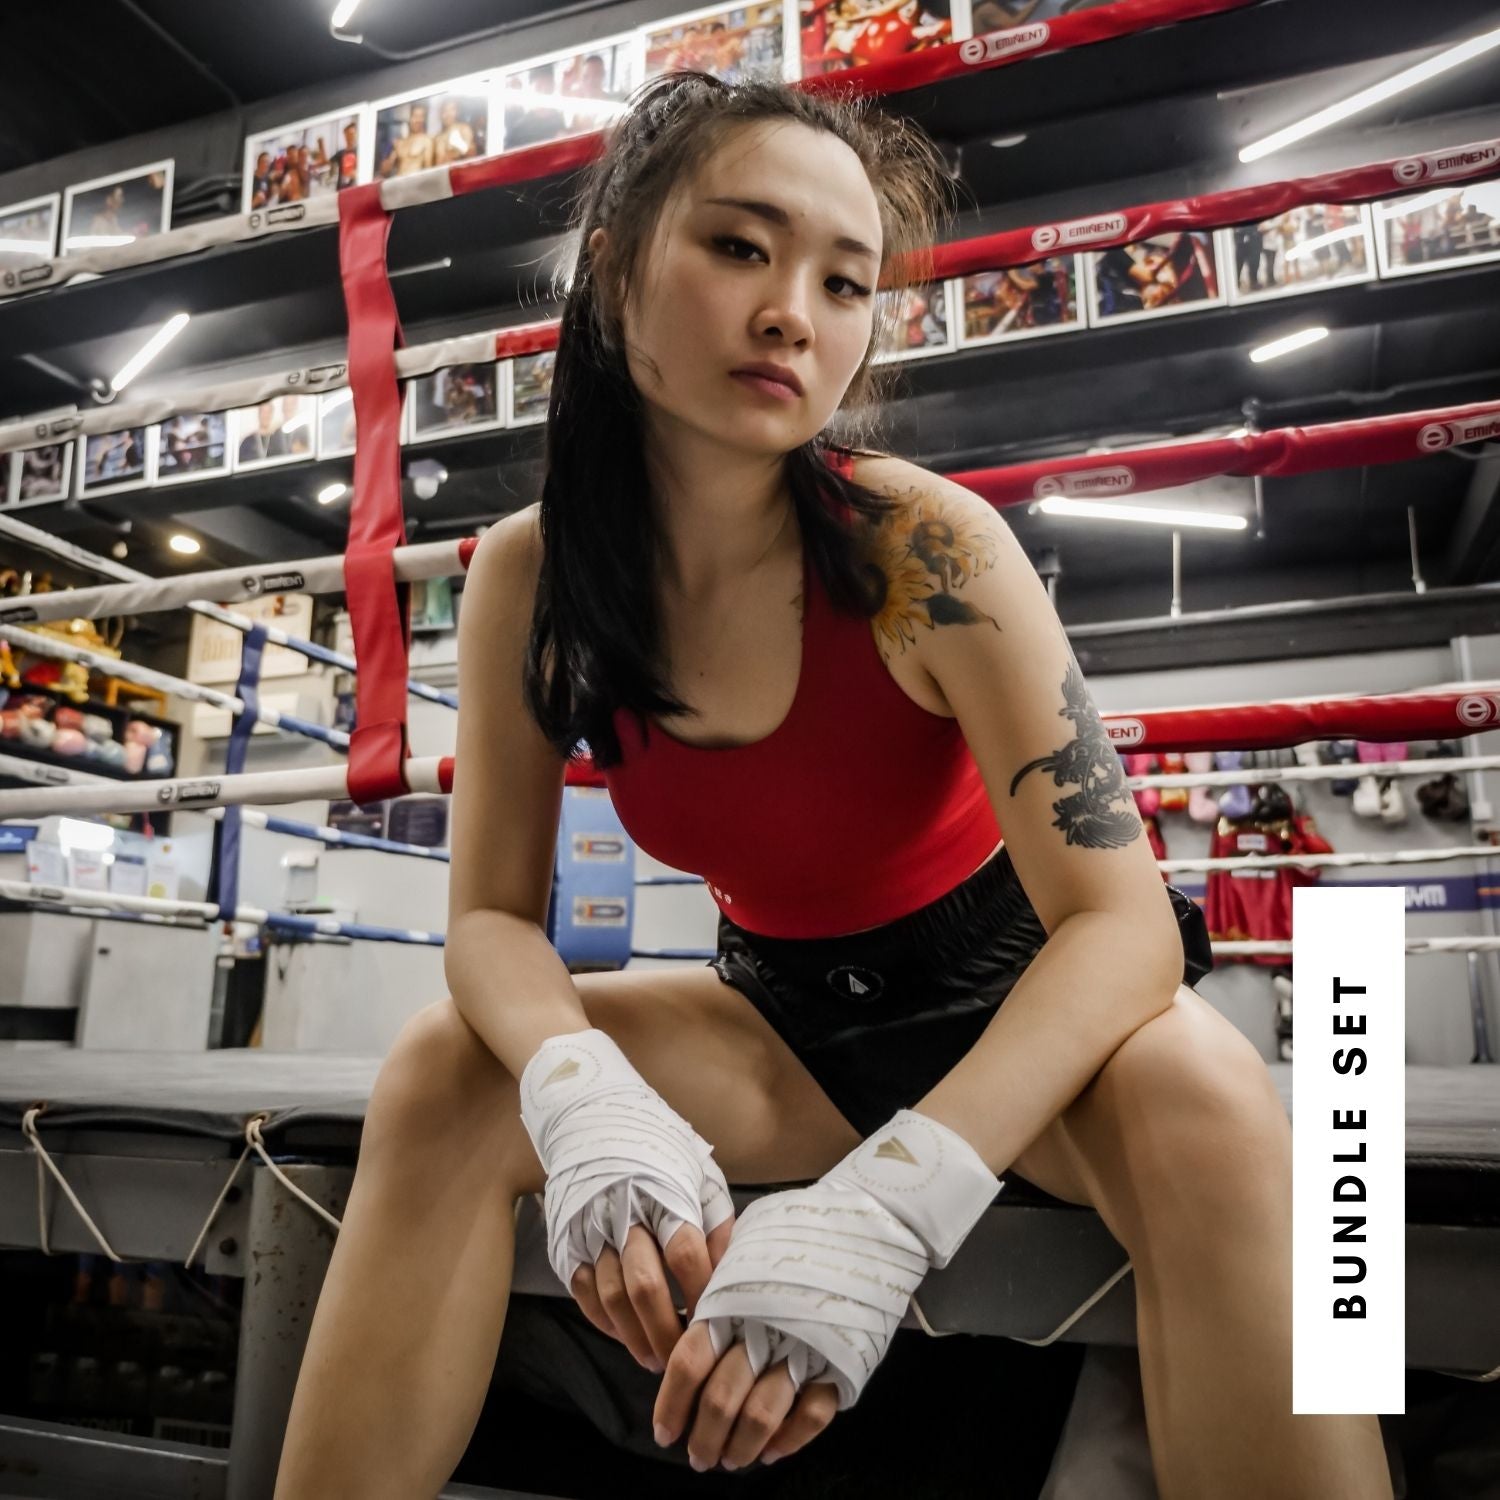 Athena Fightwear women's boxing outfit sports bra shorts for martial arts muay thai boxing kickboxing japanese proverb fall seven times get up eight